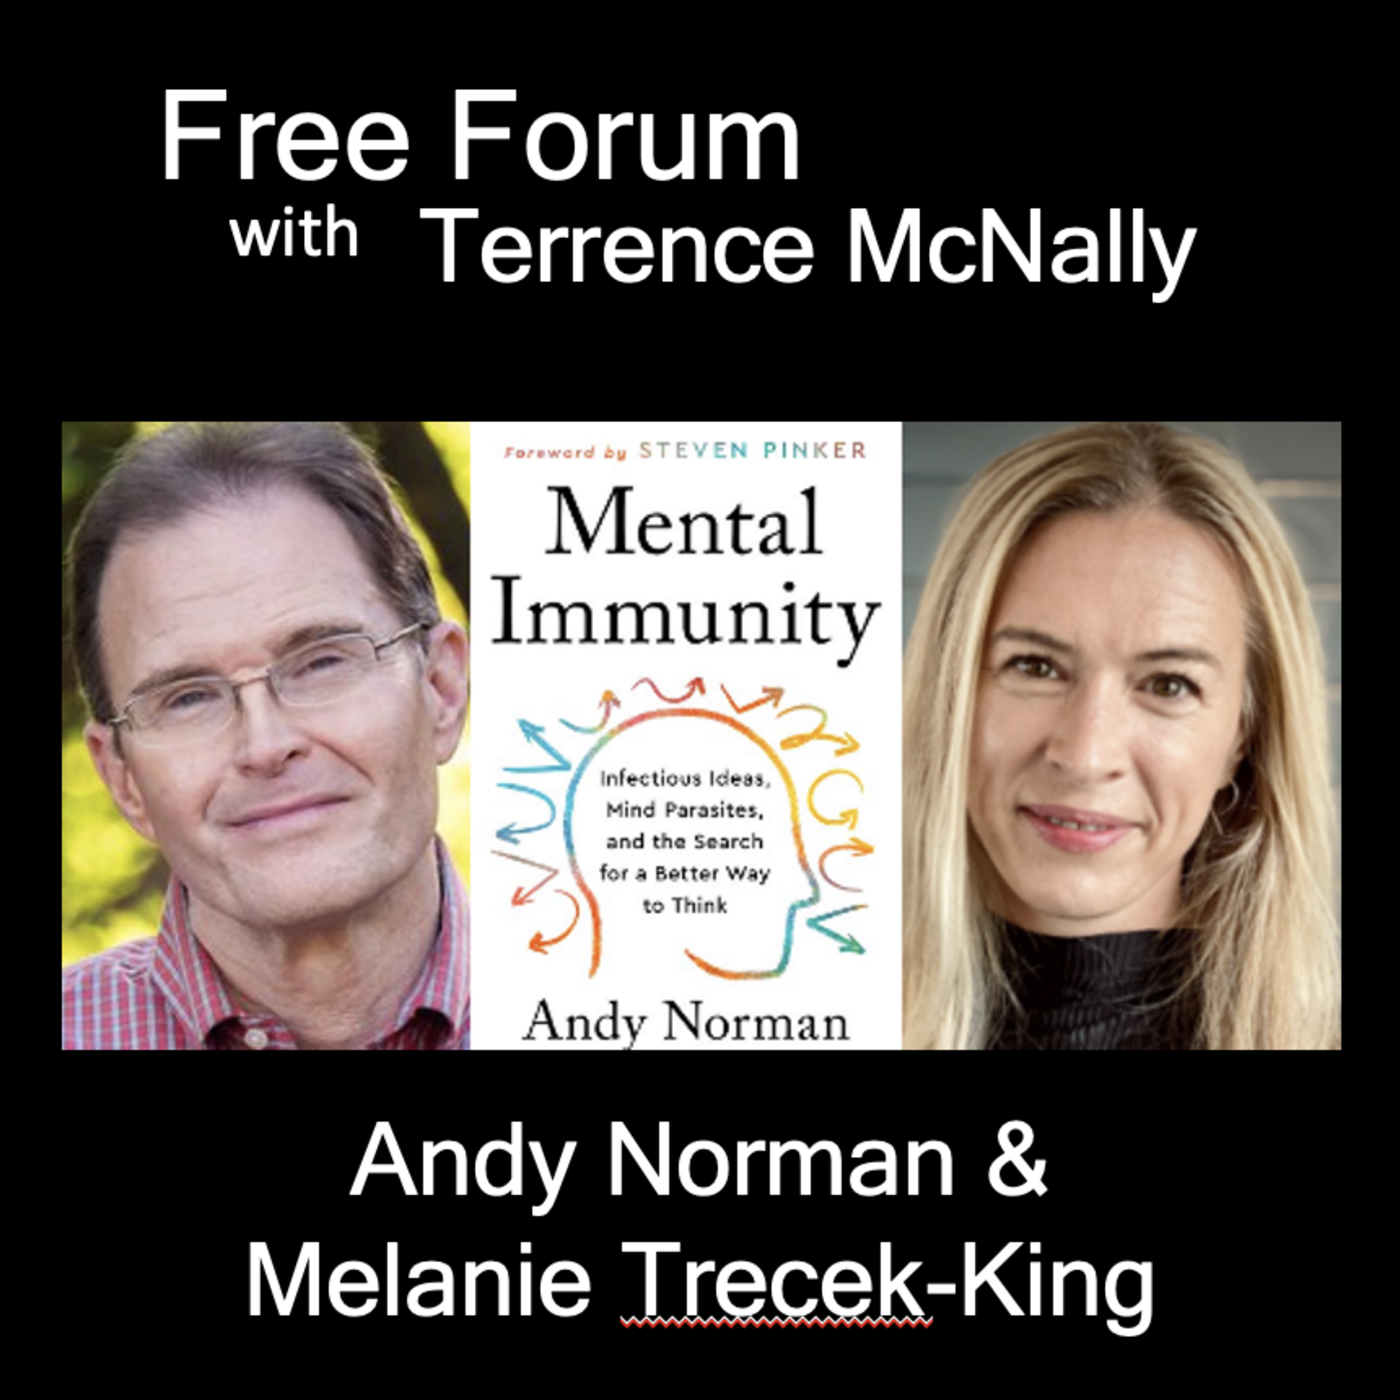 Episode 637: Can we build immunity to mis- & dis-information? ANDY NORMAN & MELANIE TRECEK-KING of the MENTAL IMMUNITY PROJECT